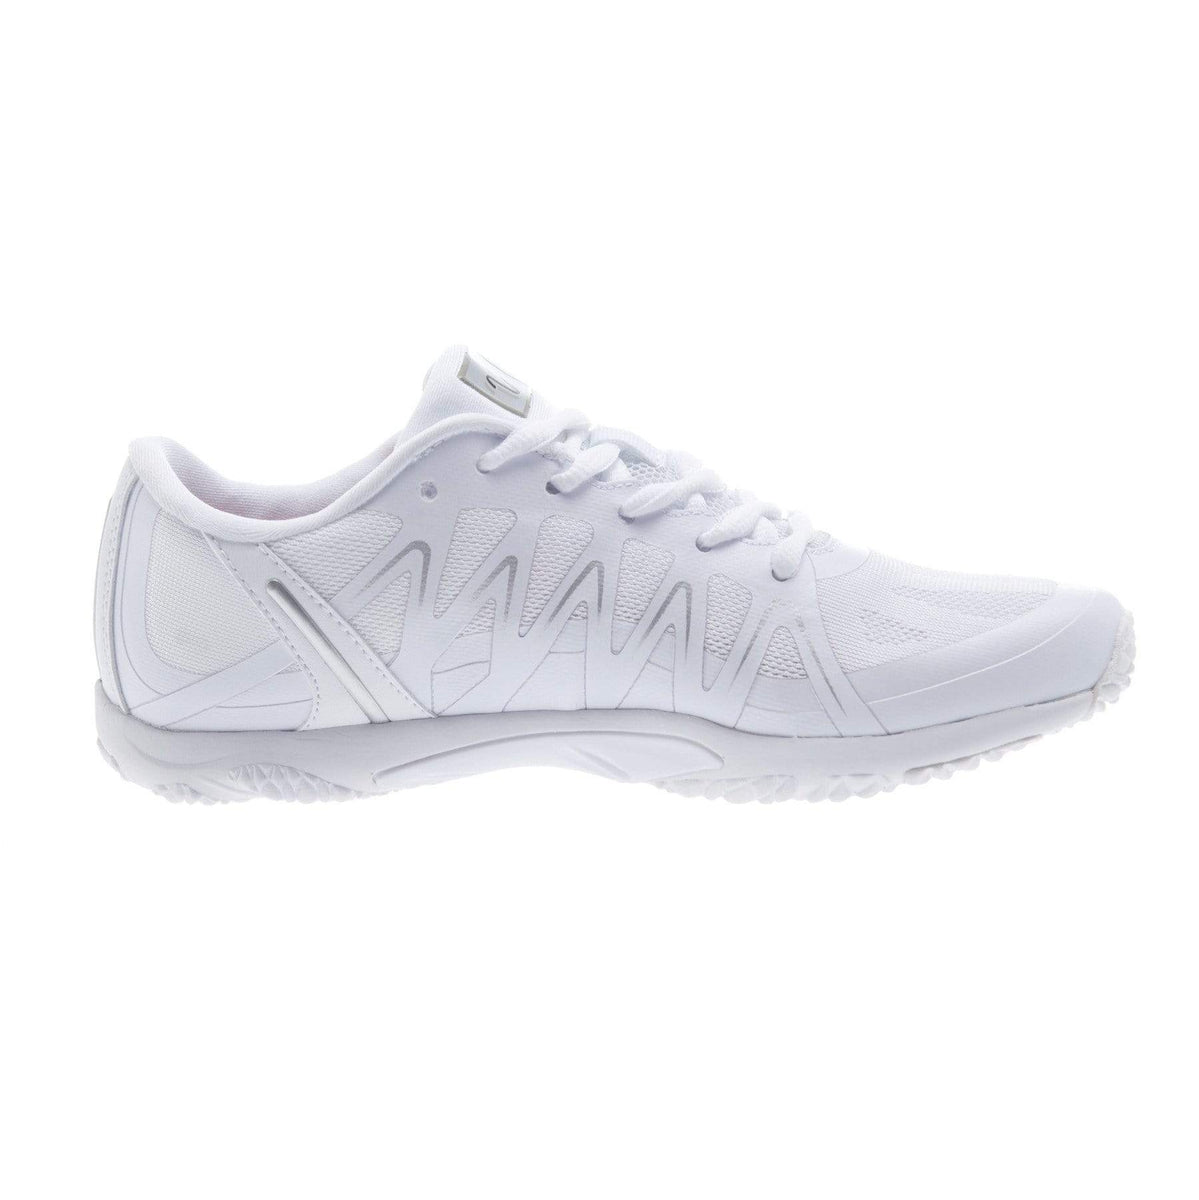 Varsity Edge Cheer Shoes | Top-Rated Cheerleading Shoes from Varsity ...